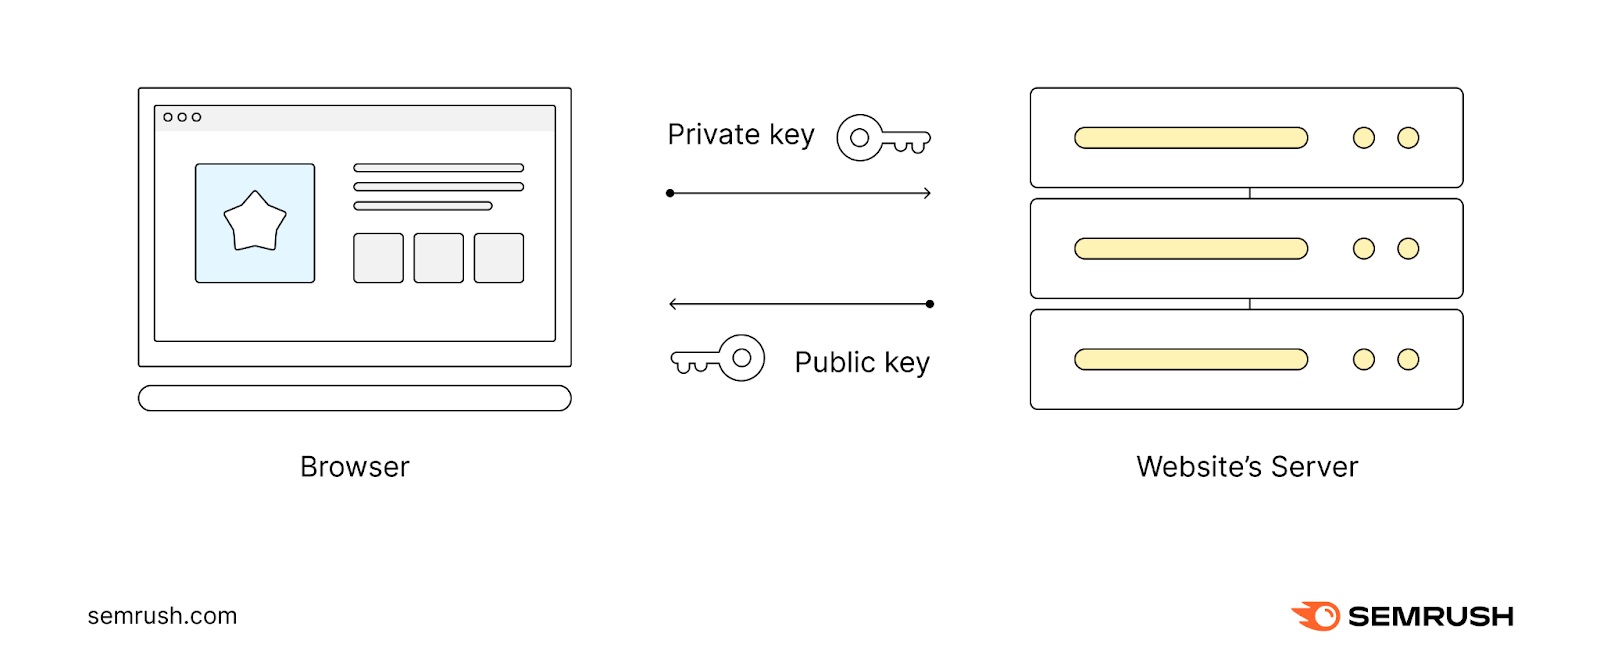 The browser and website's server exchange keys once the SSL/TLS certificate is verified